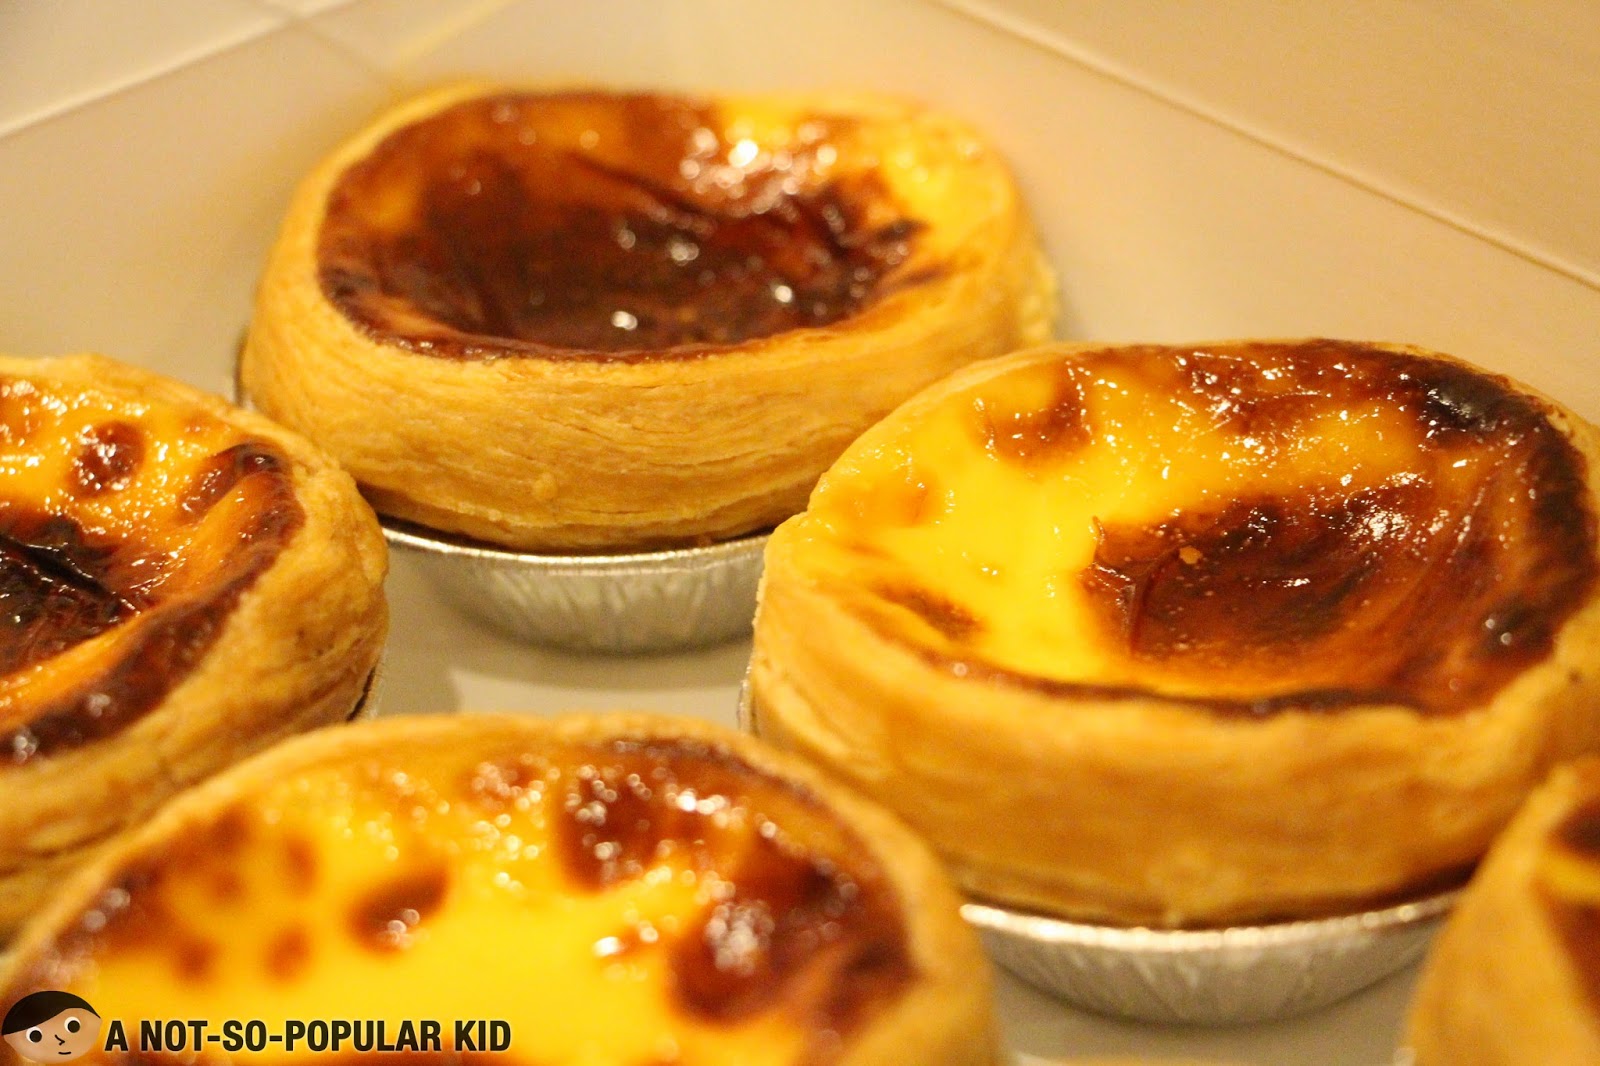 Popular Egg Tarts of Lord Stow's Bakery